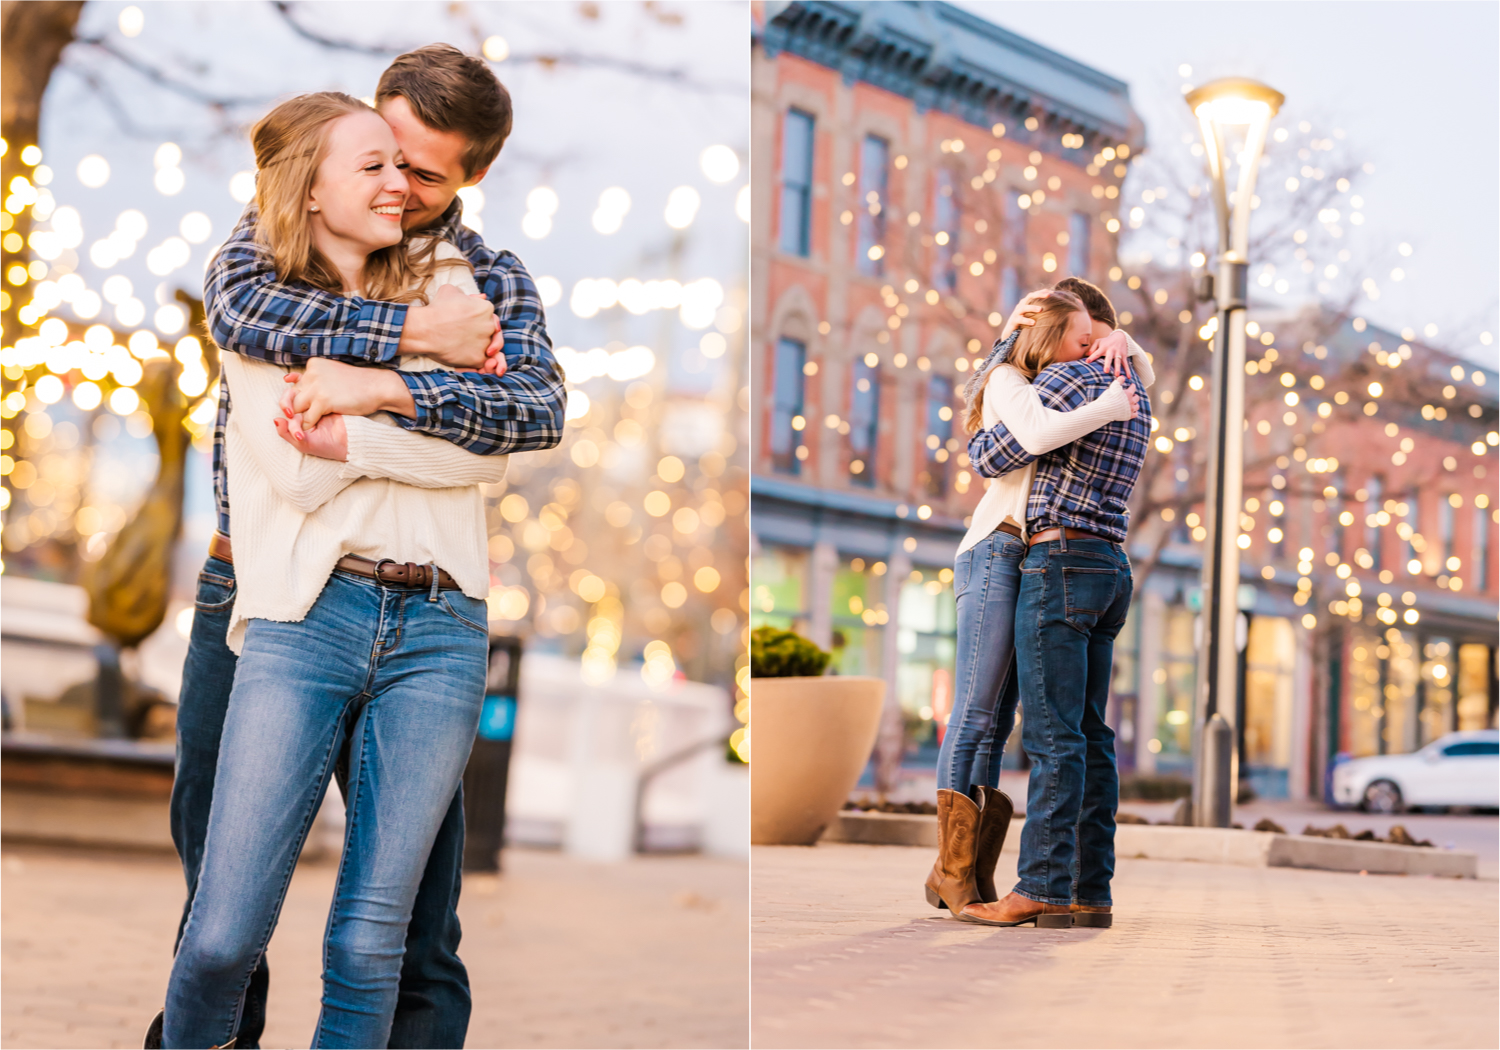 Winter Engagement in Old Town Fort Collins | Colorado Wedding Photographer and Videographer | Britni Girard Photography | Wedding and Engagement Films | Dancing, twinkle lights and Christmas in Old Town Square